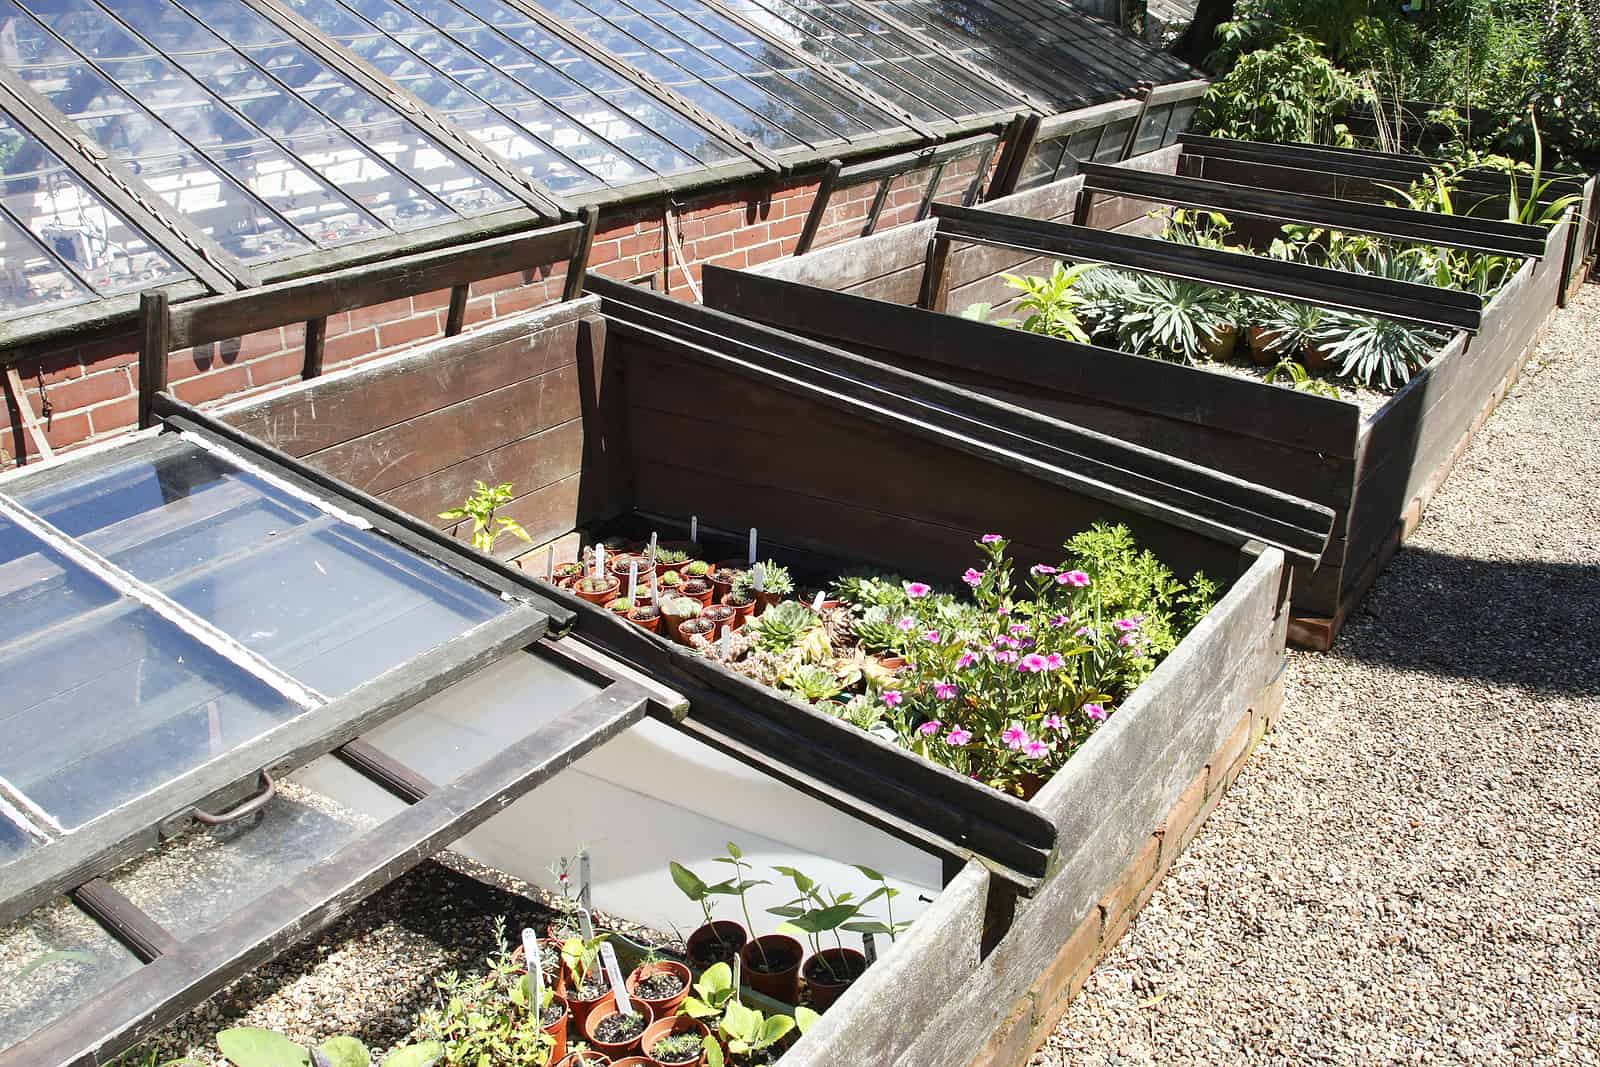 South facing cold frames